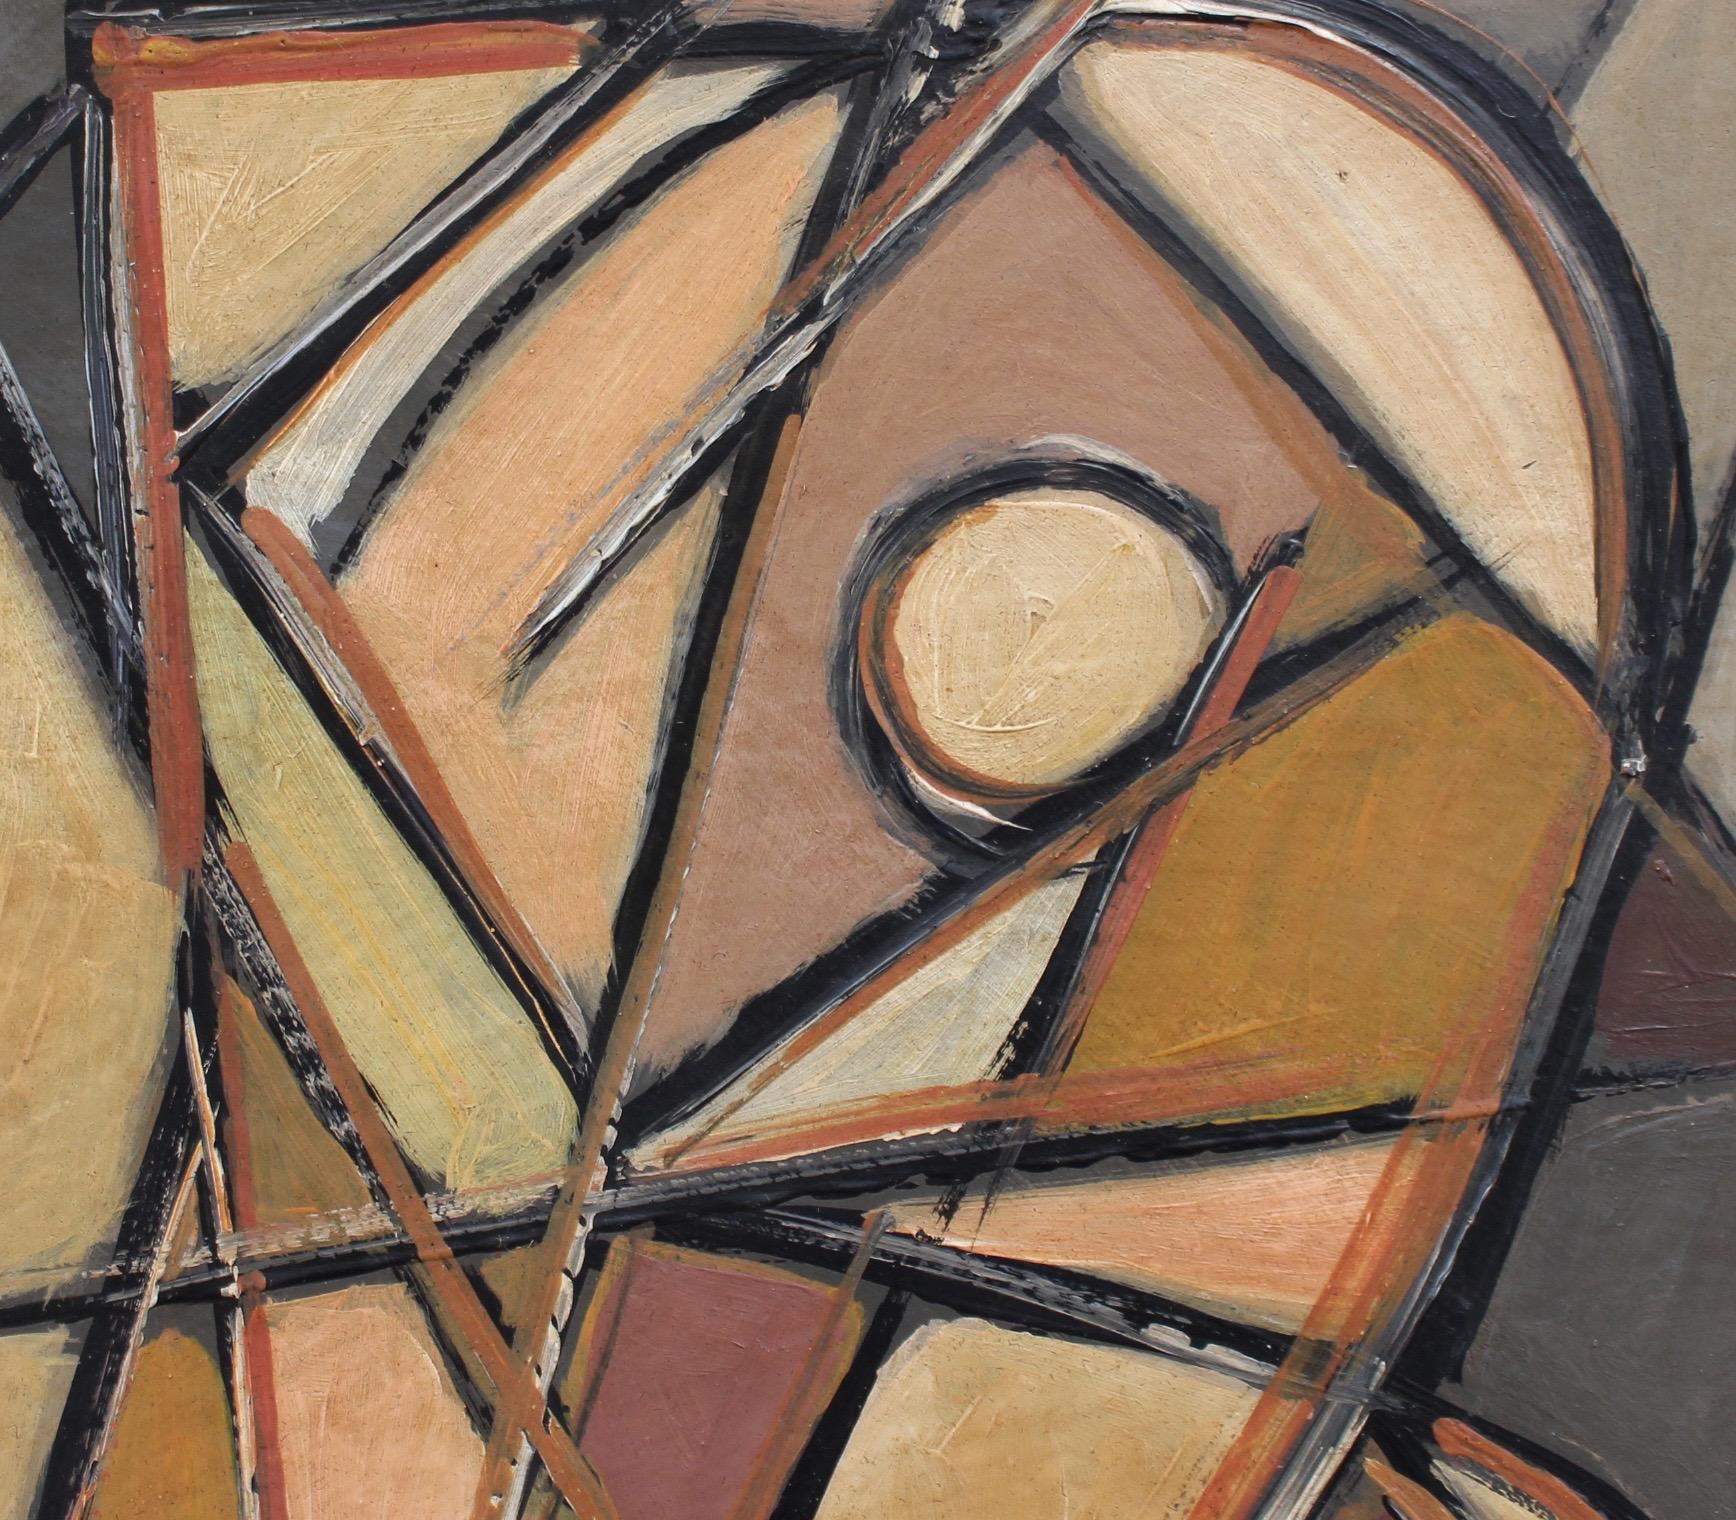 'Portrait of Woman in the Mirror', oil on board, by STM (circa 1940s - 1960s). When we gaze in the mirror, we like to see ourselves from all angles. This beautifully intricate cubist work comes alive with its earth-tone hues and harmonious